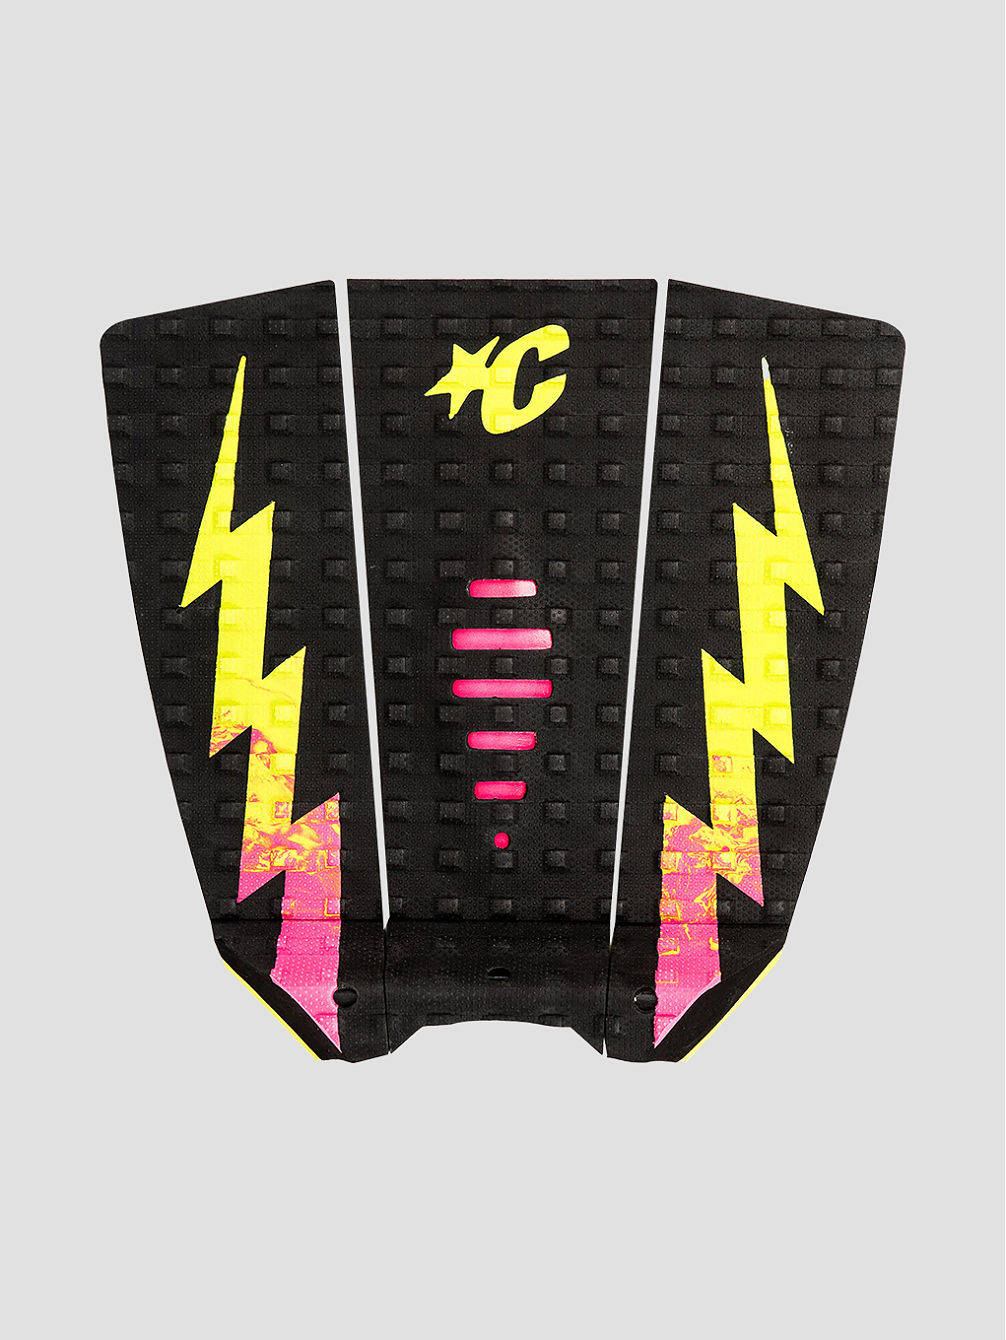 Mick Eugene Fanning Lite Traction Tail Pad